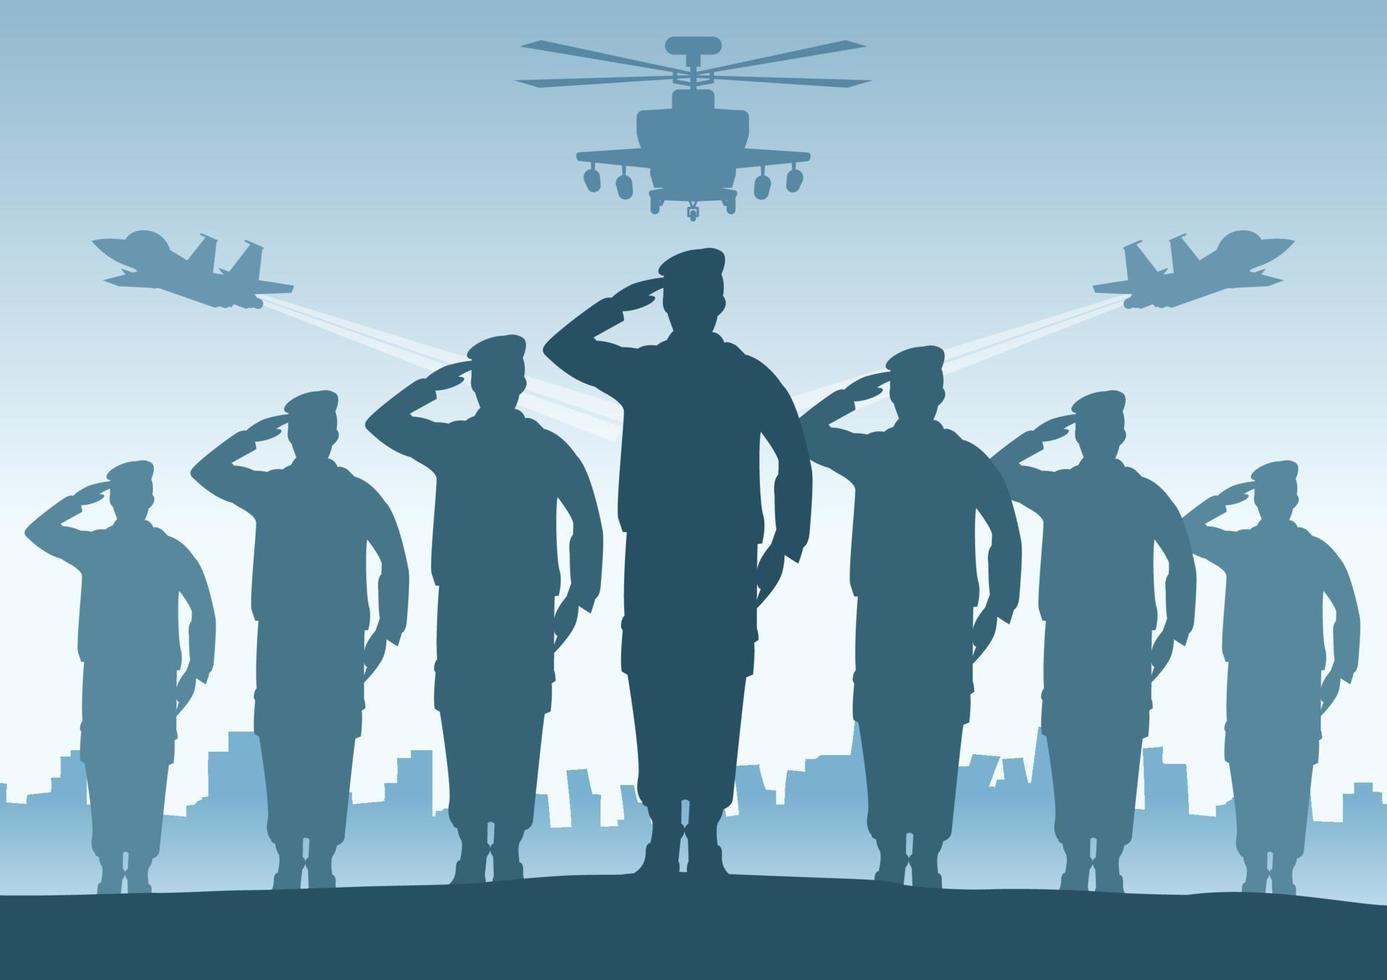 Silhouette design of soldier standing and do salute vector